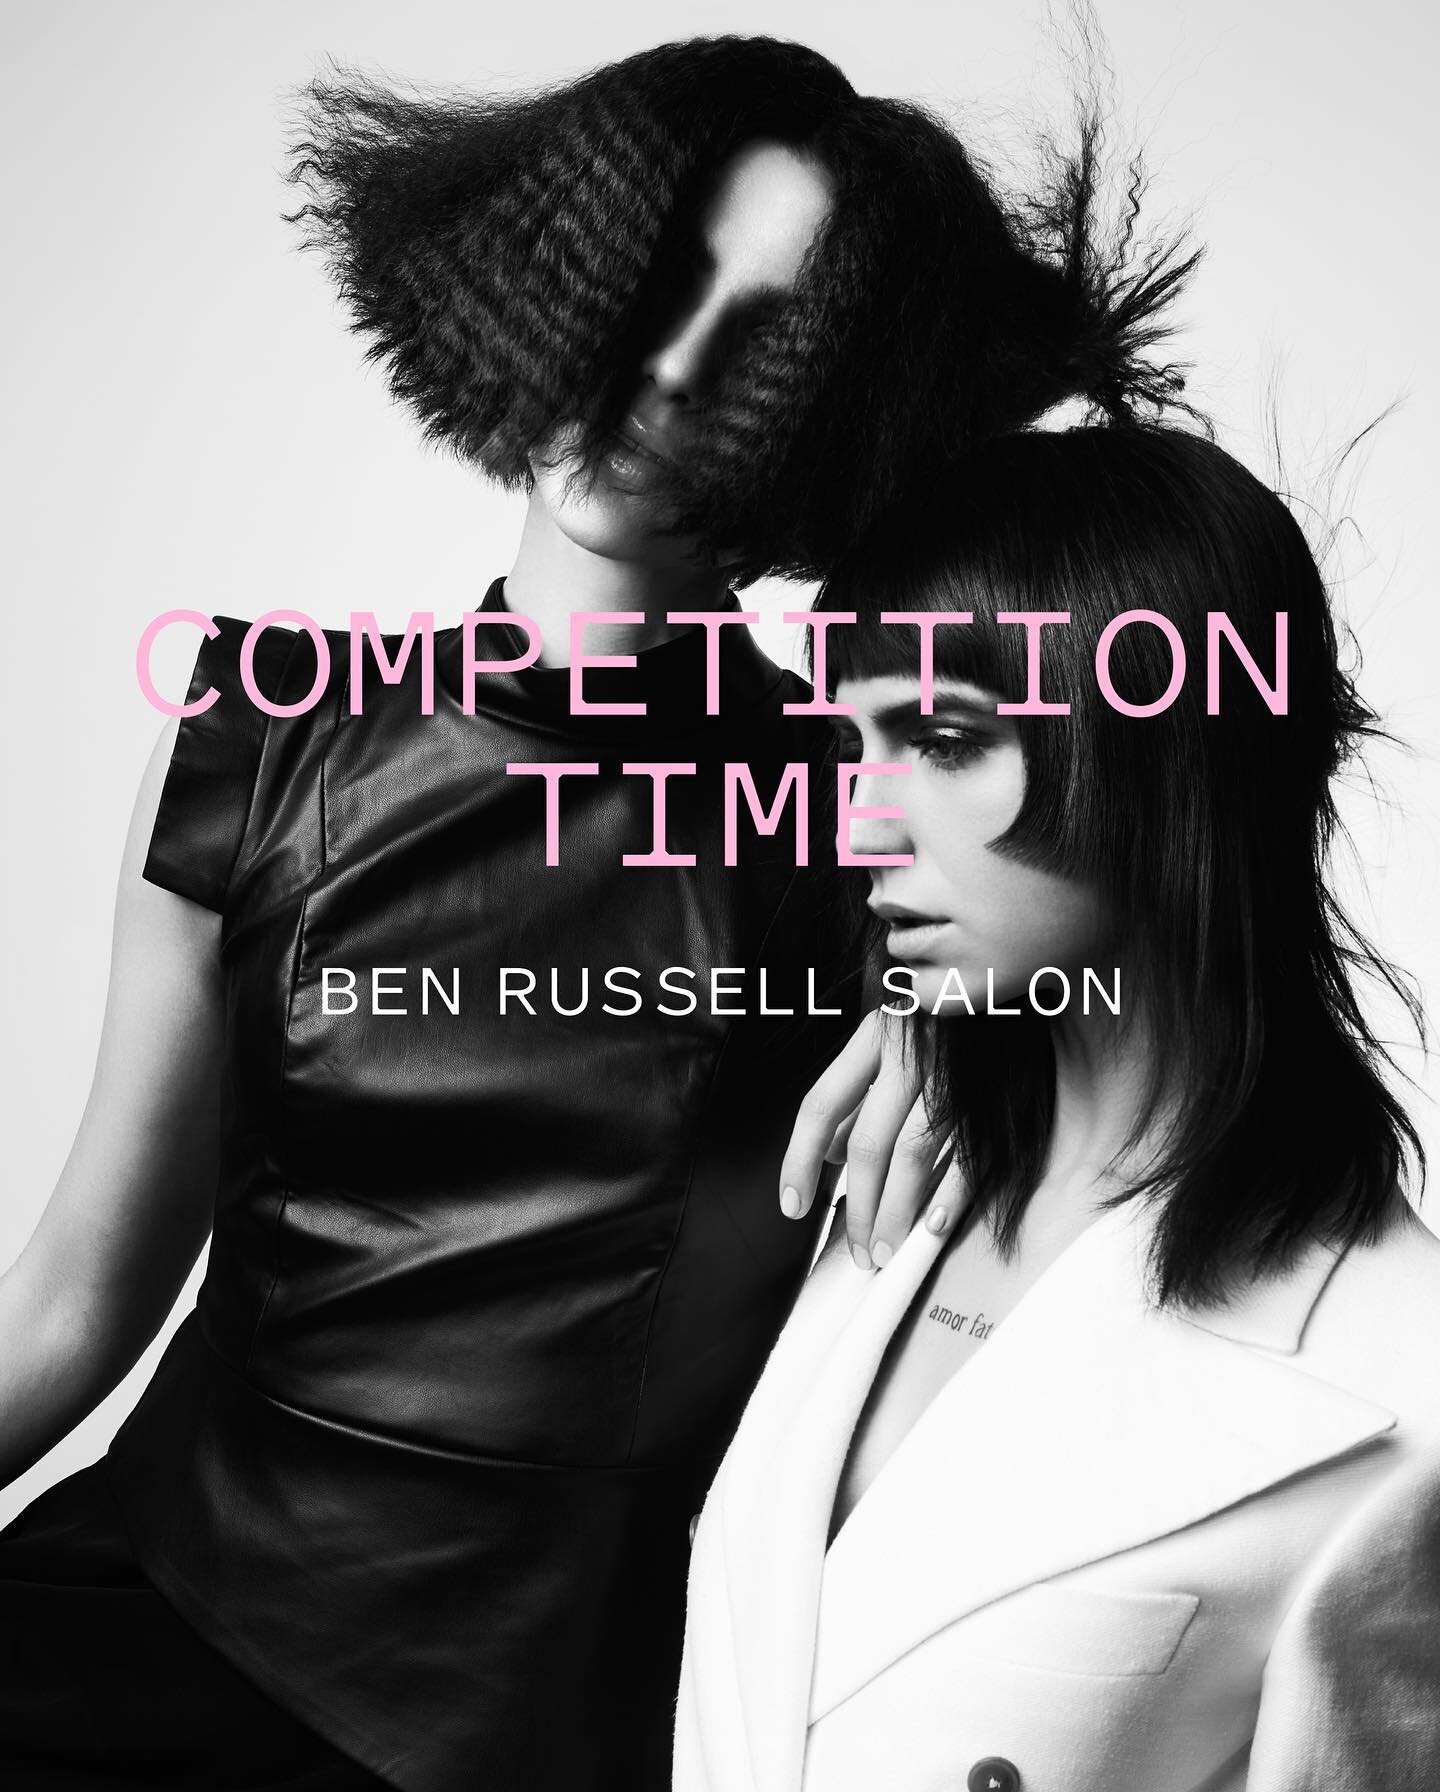 TOMORROW WE WILL BE ANNOUNCING OUR BIGGEST EVER GIVEAWAY COMPETITION EVER&hellip;&hellip;&hellip; Keep an eye out 👁 

#BENRUSSELLSALON 
#BENRUSSELLHAIR 
For bookings 
call 01460 55686
Click the link  in BIO